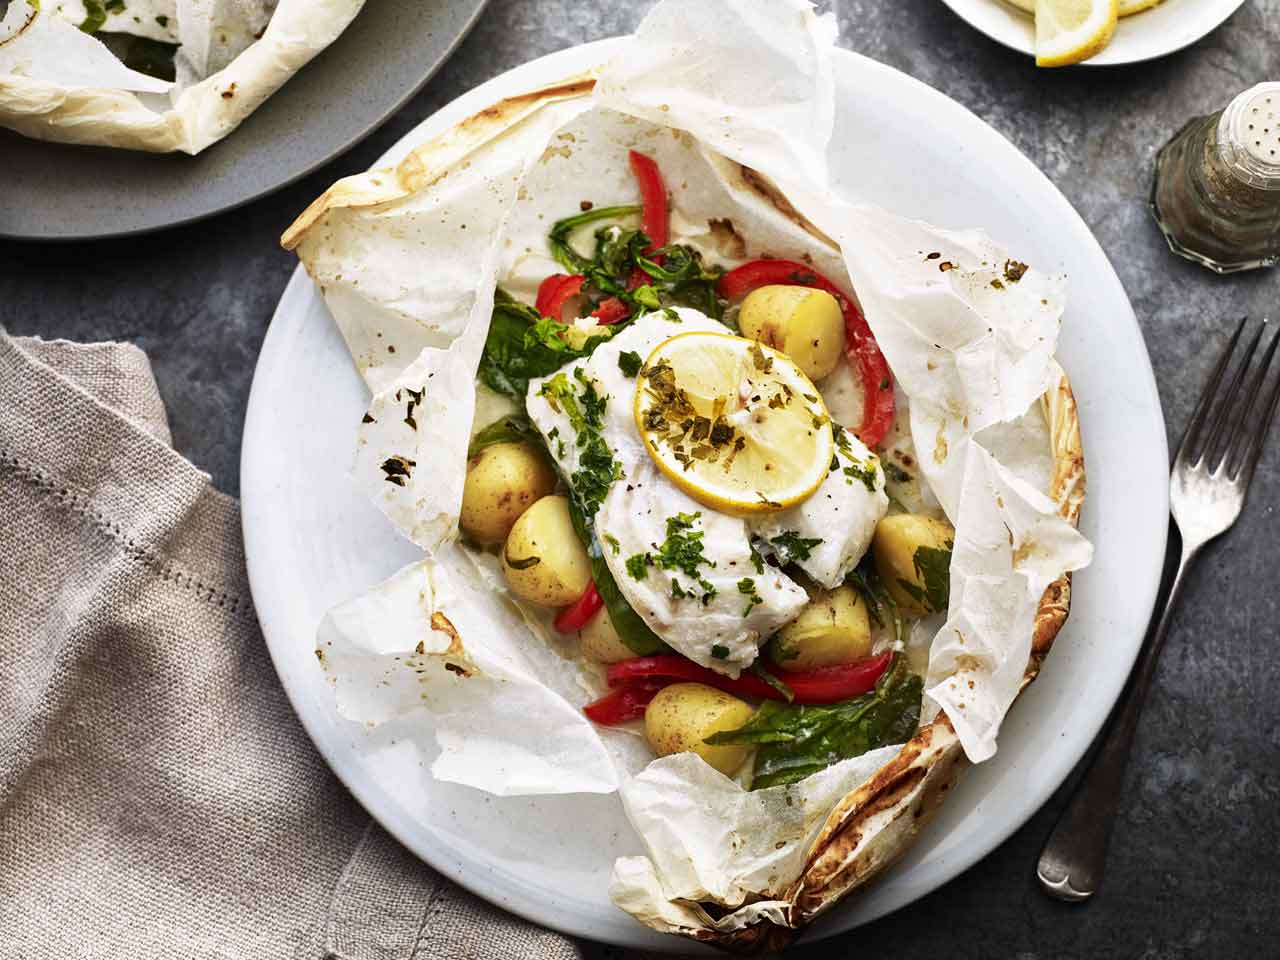 Cod en papillote with baked new potatoes